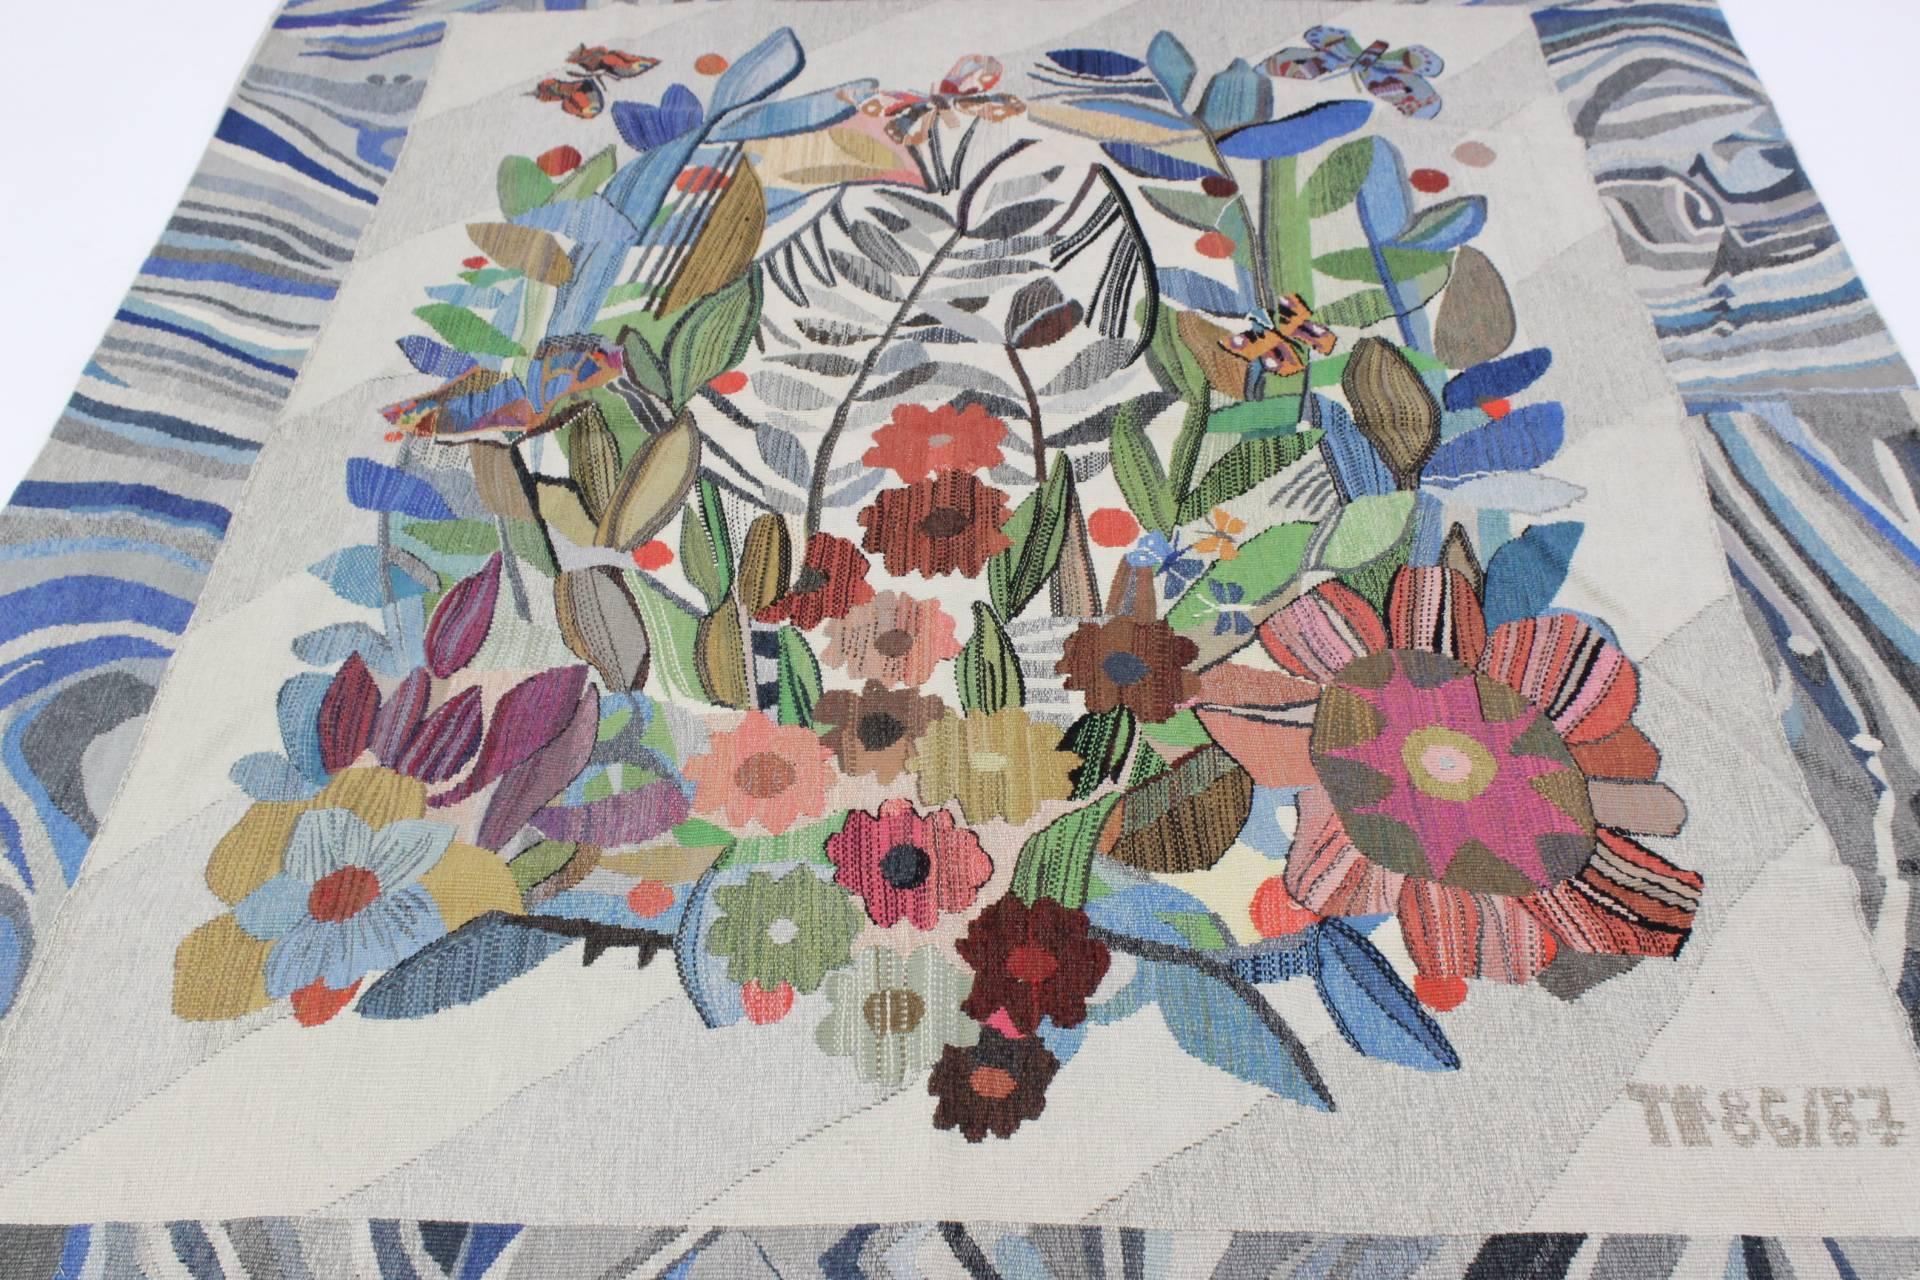 The tapestry was made in the year 1986 for the Russian embassy in Czechoslovakia. It was never used and has been in storage since. This is a one-of-a-kind piece in bright colors. Handmade in Valaske Mezirici.